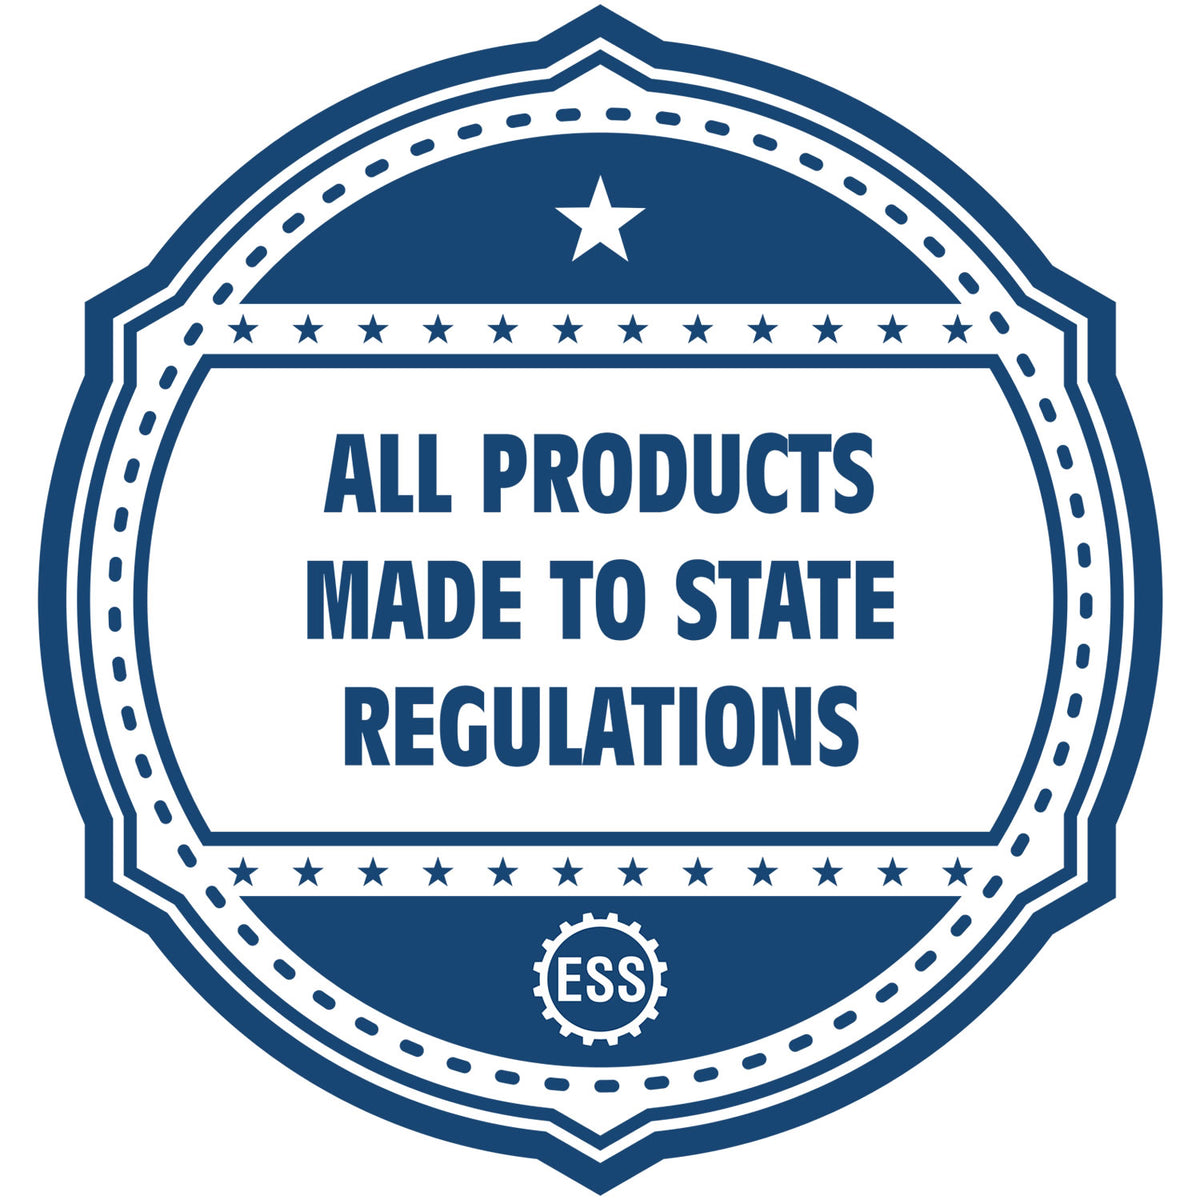 An icon or badge element for the Handheld New Hampshire Professional Engineer Embosser showing that this product is made in compliance with state regulations.